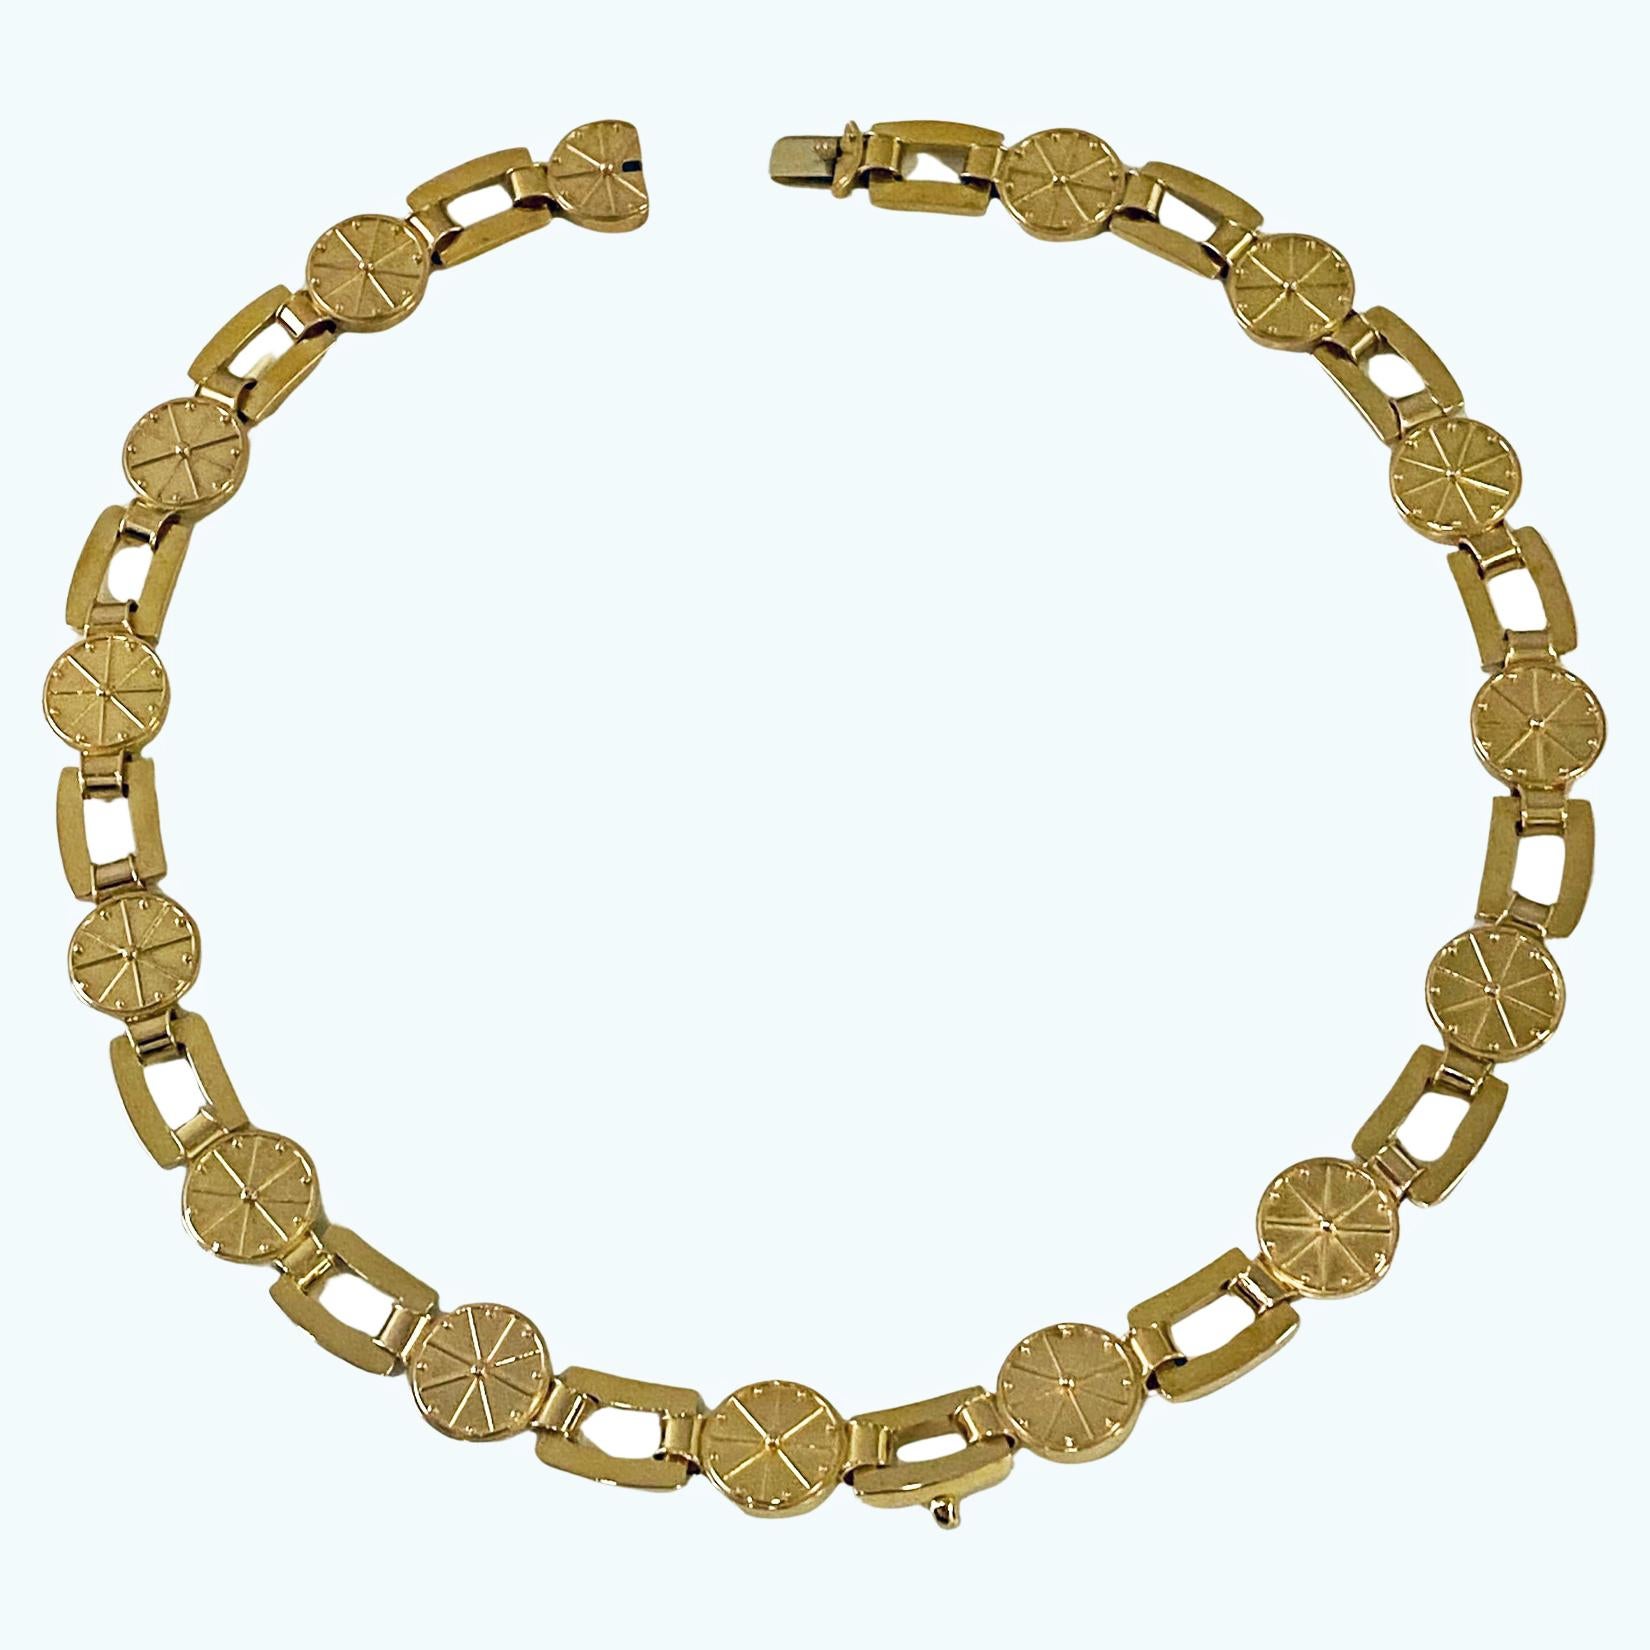 Antique Gold Necklace English Circa 1860. Composed of rectangular and circular-shaped links, partly decorated with ray design. Tongue clasp fastener conforming to link. Bale hook fitment to allow for a drop pendant. Length: 17.50 inches. Item